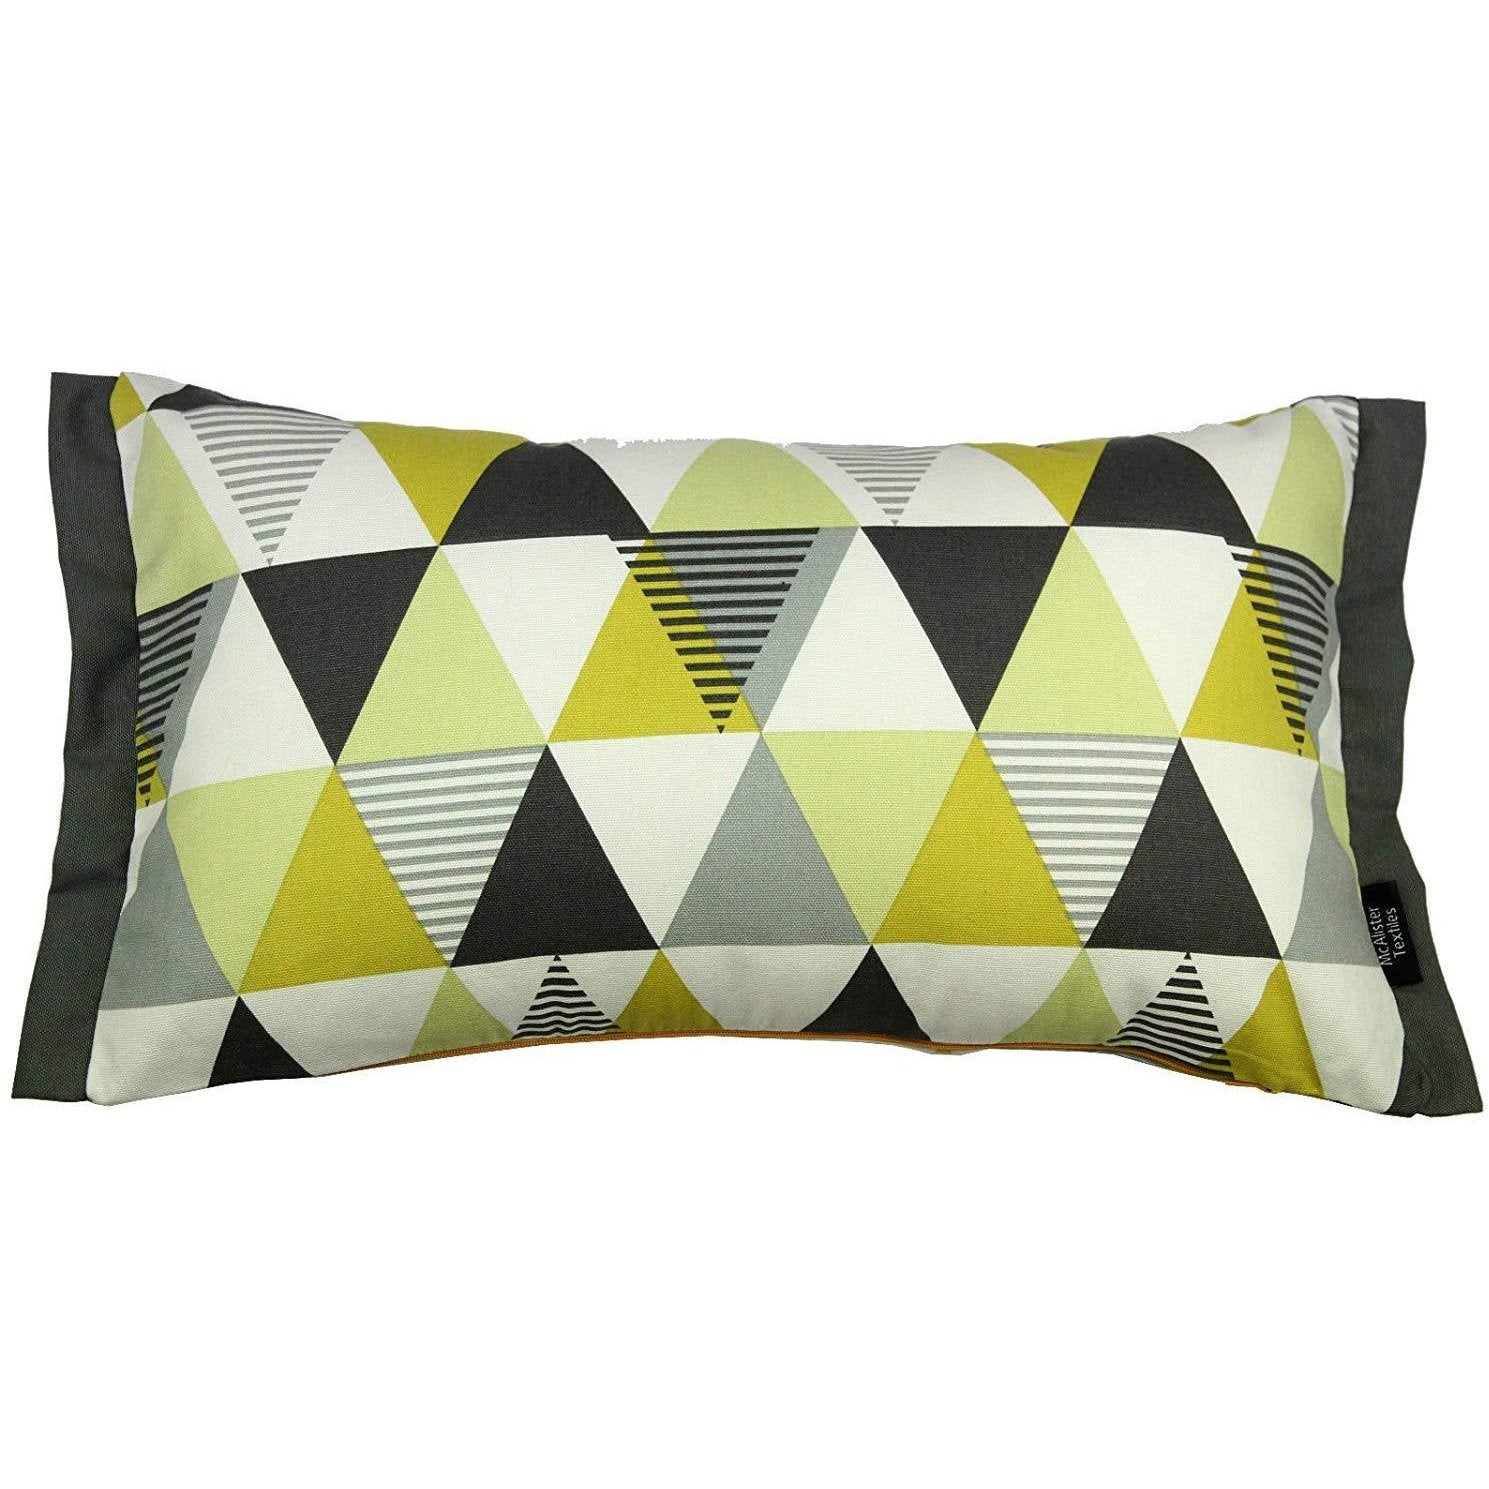 McAlister Textiles Vita Cotton Print Ochre Yellow Cushion Cushions and Covers Cover Only 50cm x 30cm 